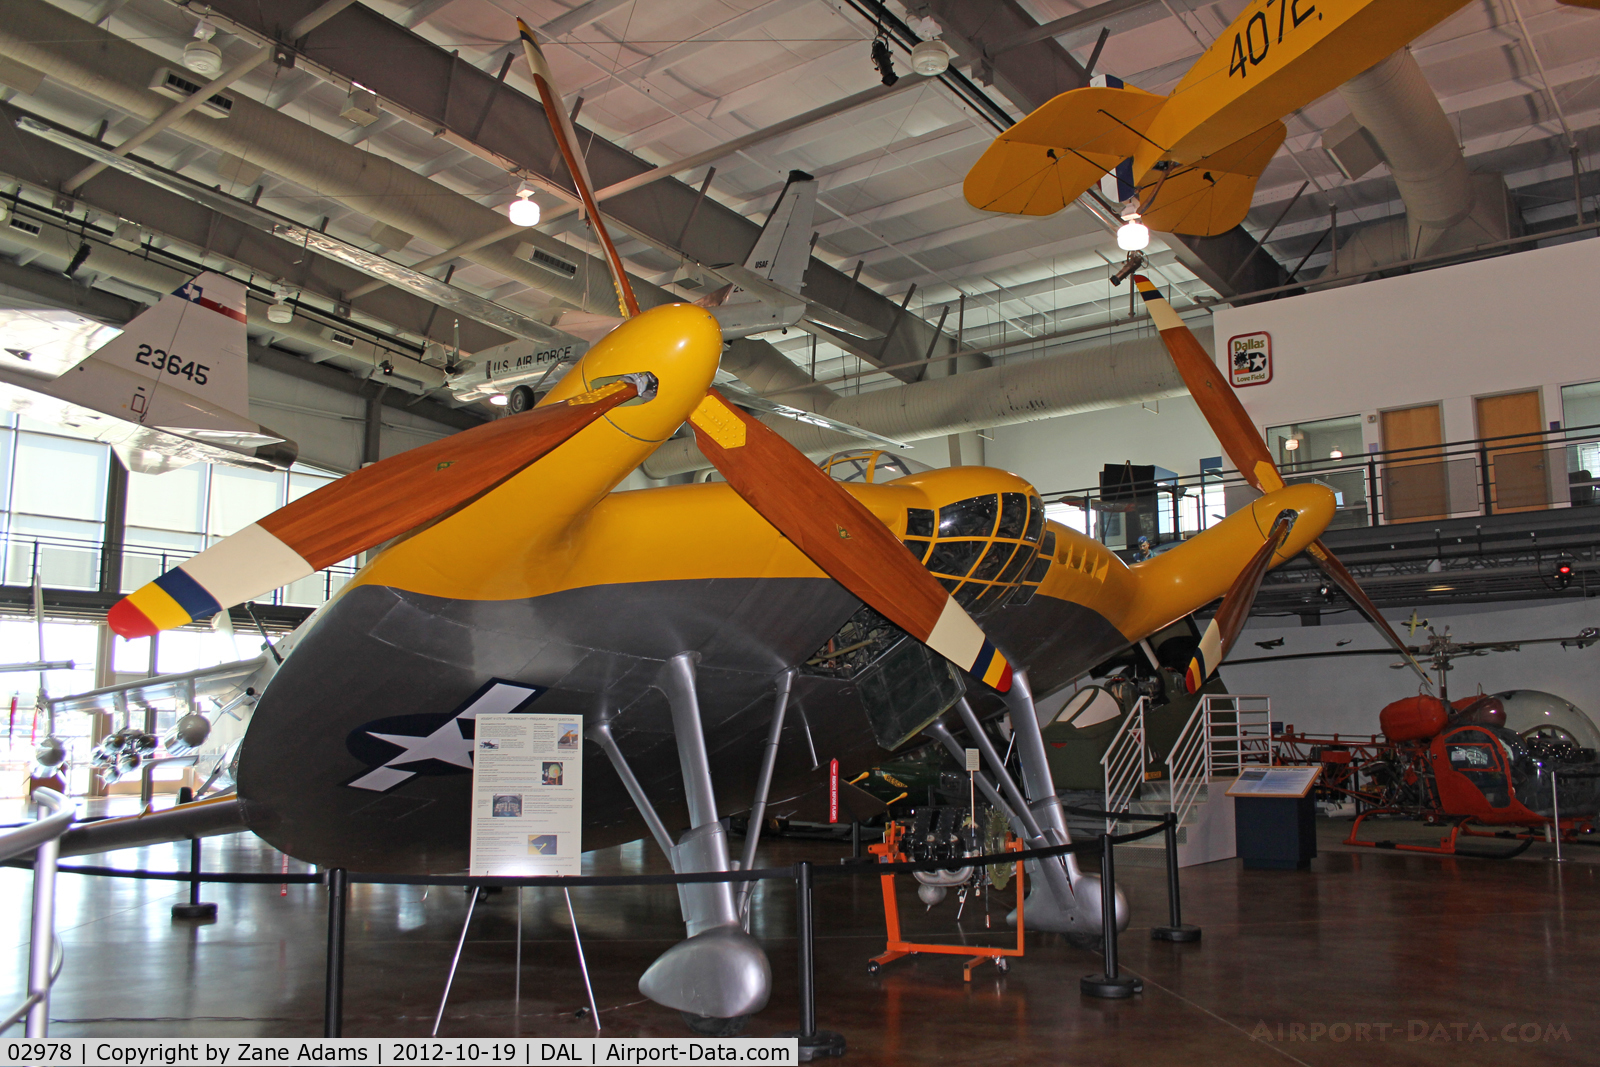 02978, 1942 Vought V-173 C/N 1, The Flying Pancake on display at the Frontiers of Flight Museum - Dallas, Texas